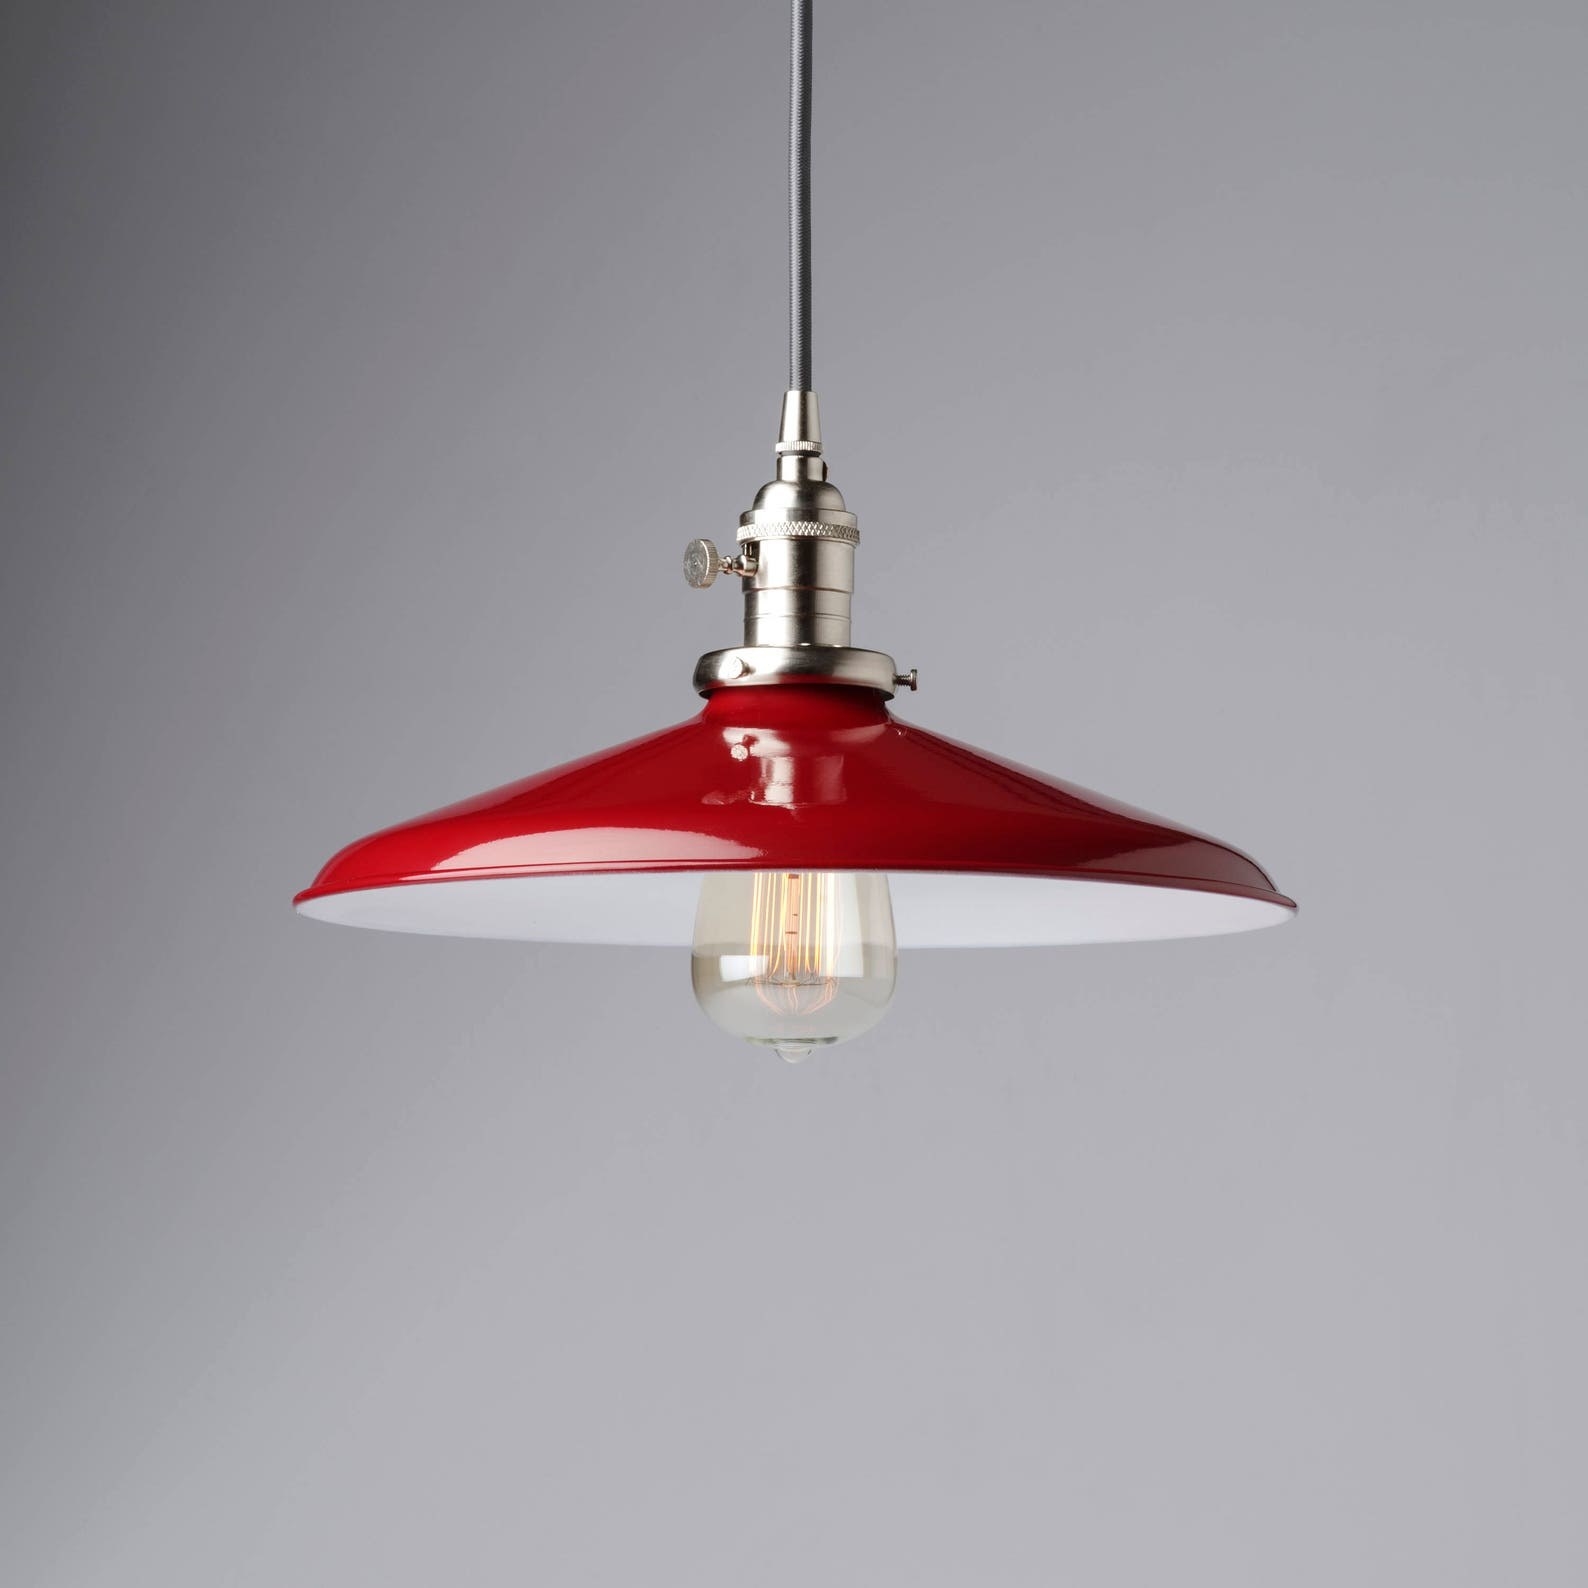 a hanging red pendant light